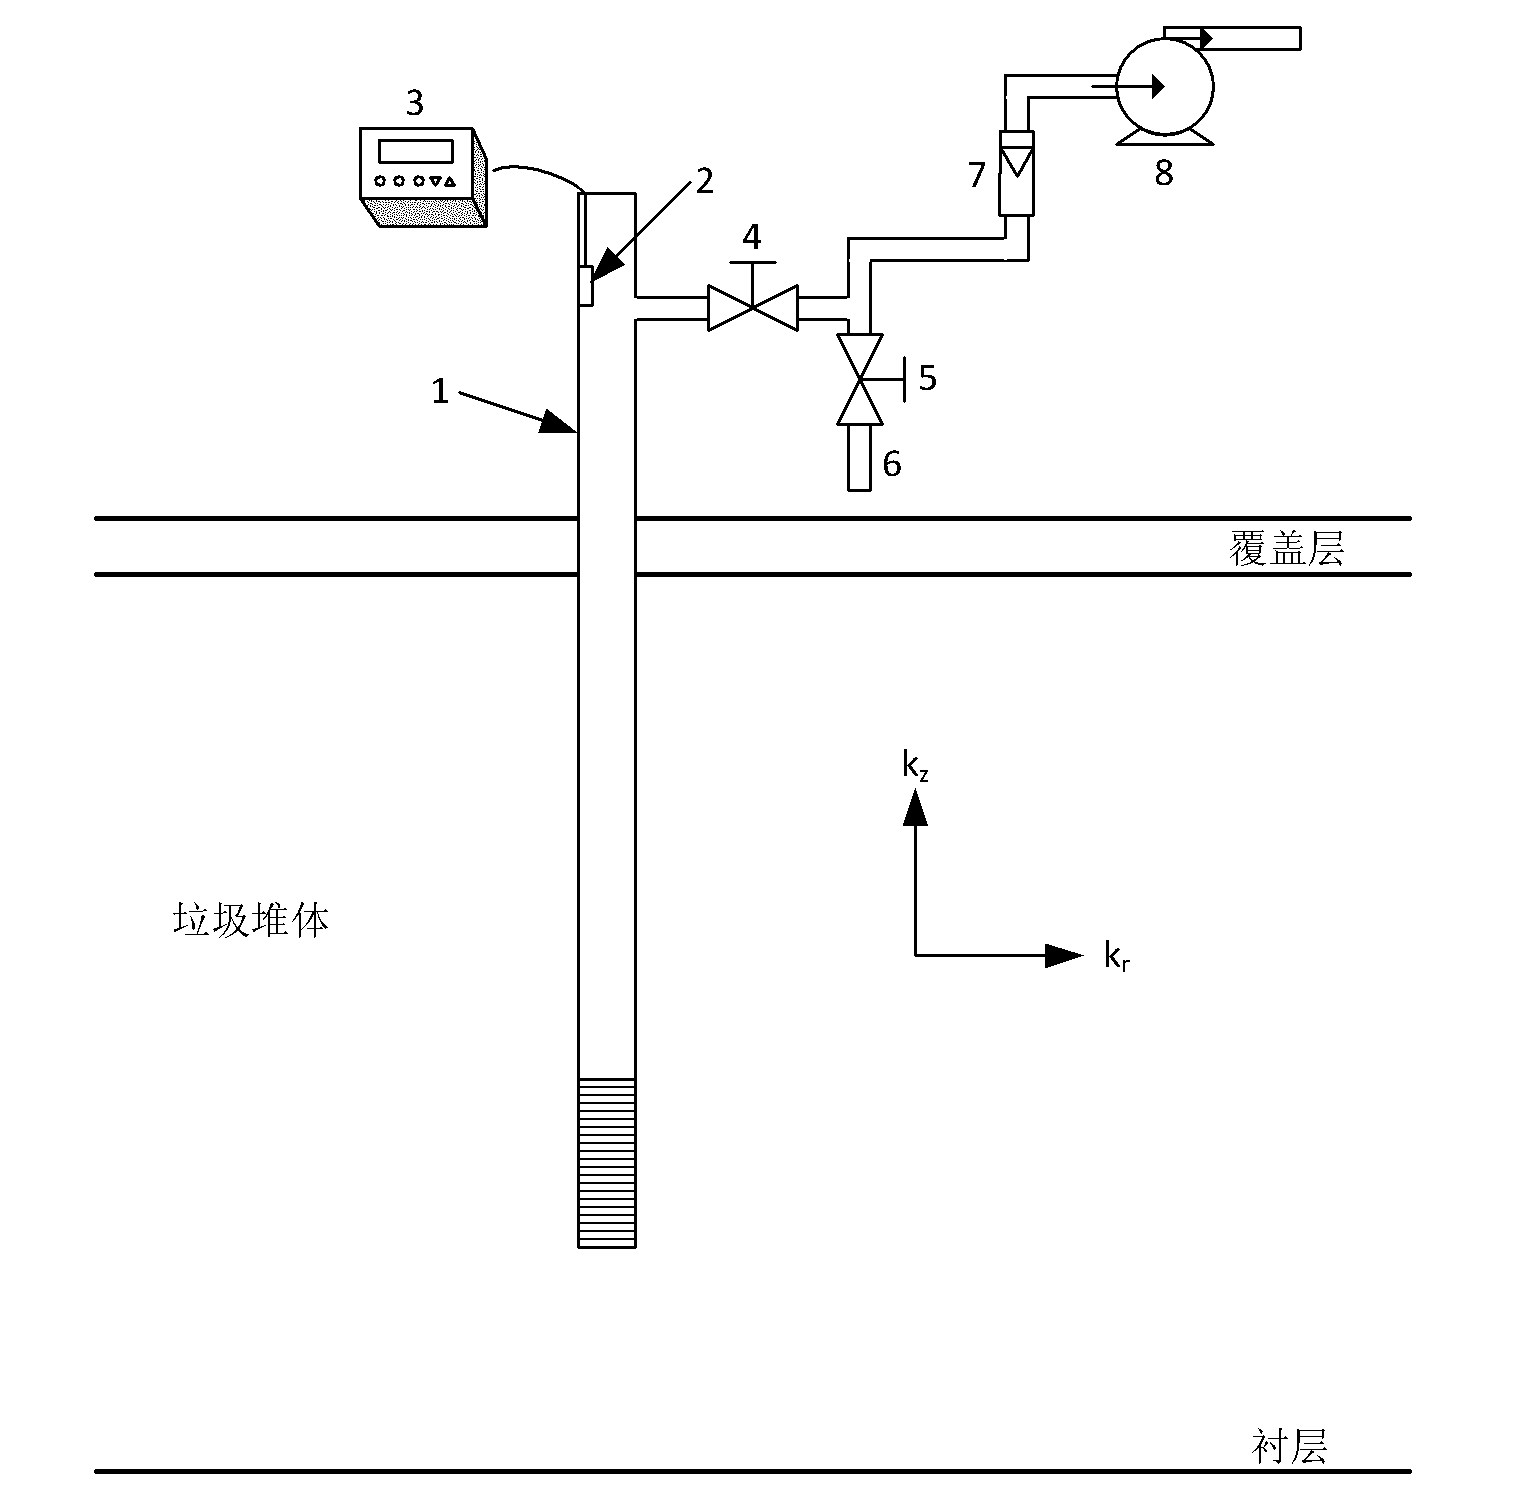 Method for on-site measuring permeability coefficient of landfill gas